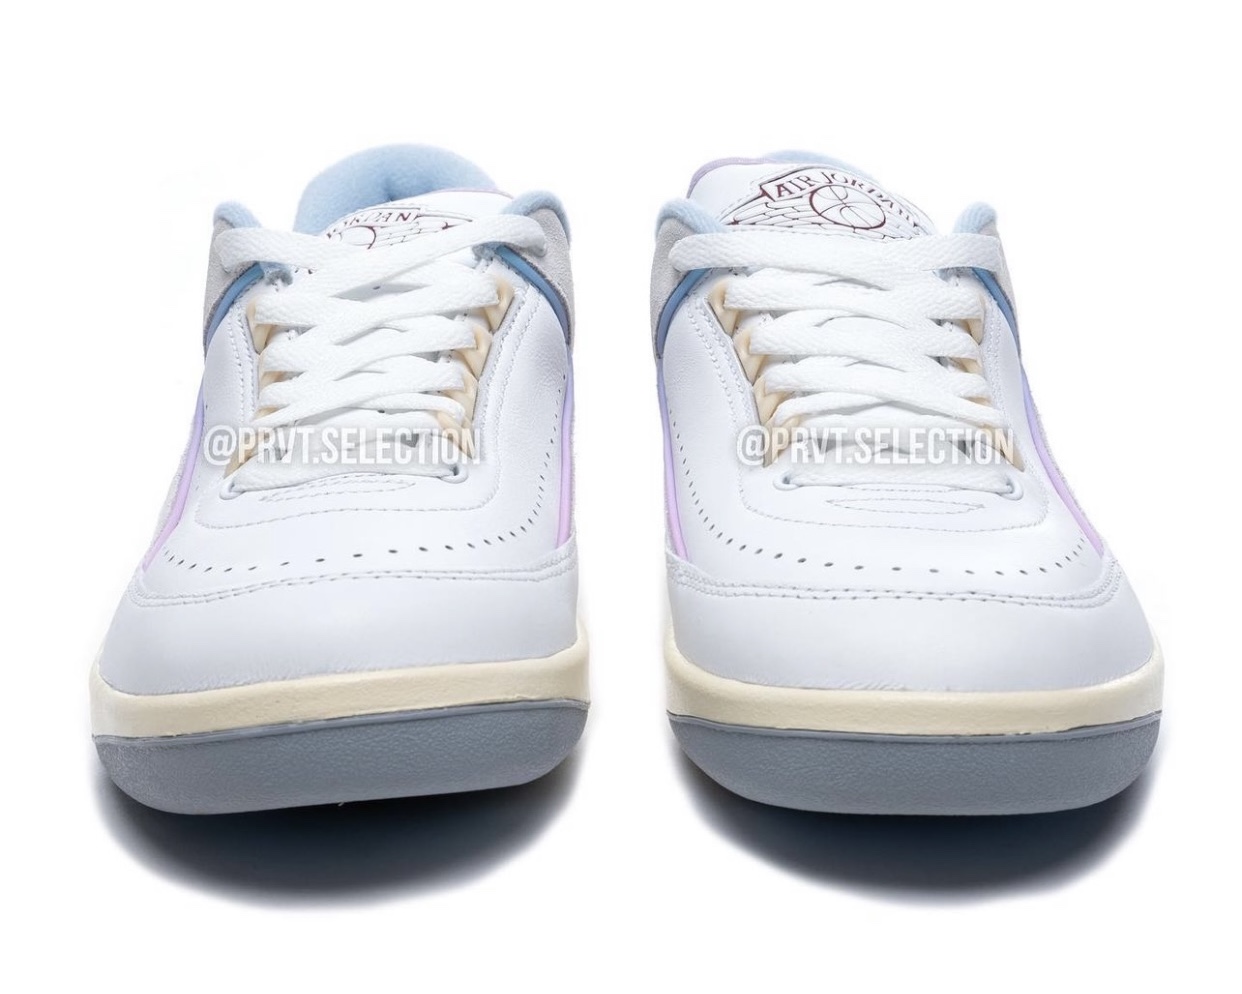 Air Jordan 2 Low Look Up In The Air DX4401-146 WMNS Release Date Front